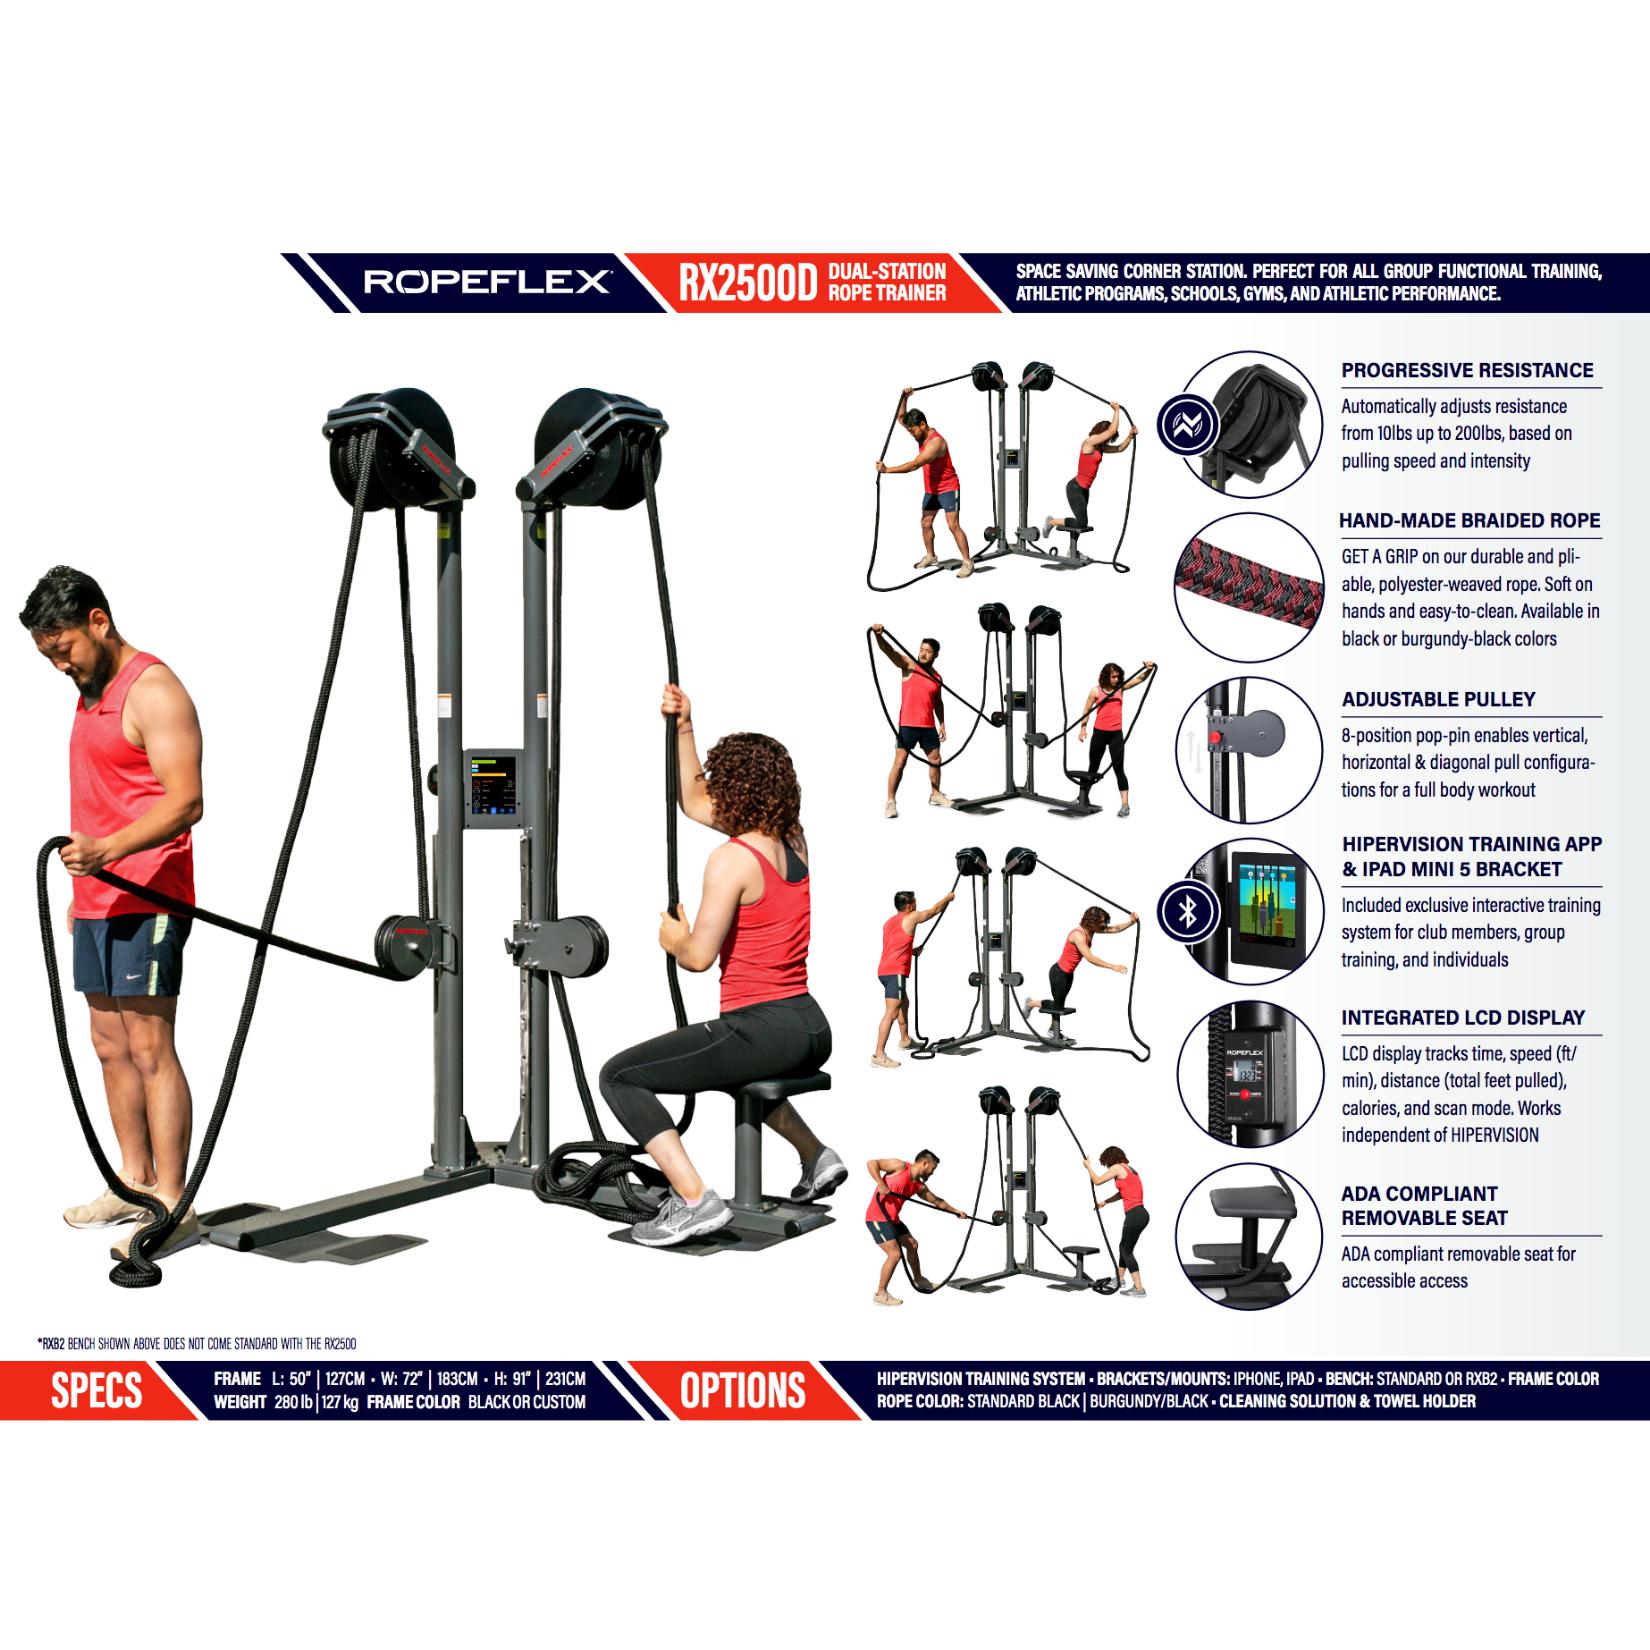 Ropeflex RX2500D Dual-Station Oryx Rope Trainer Feature Sheet